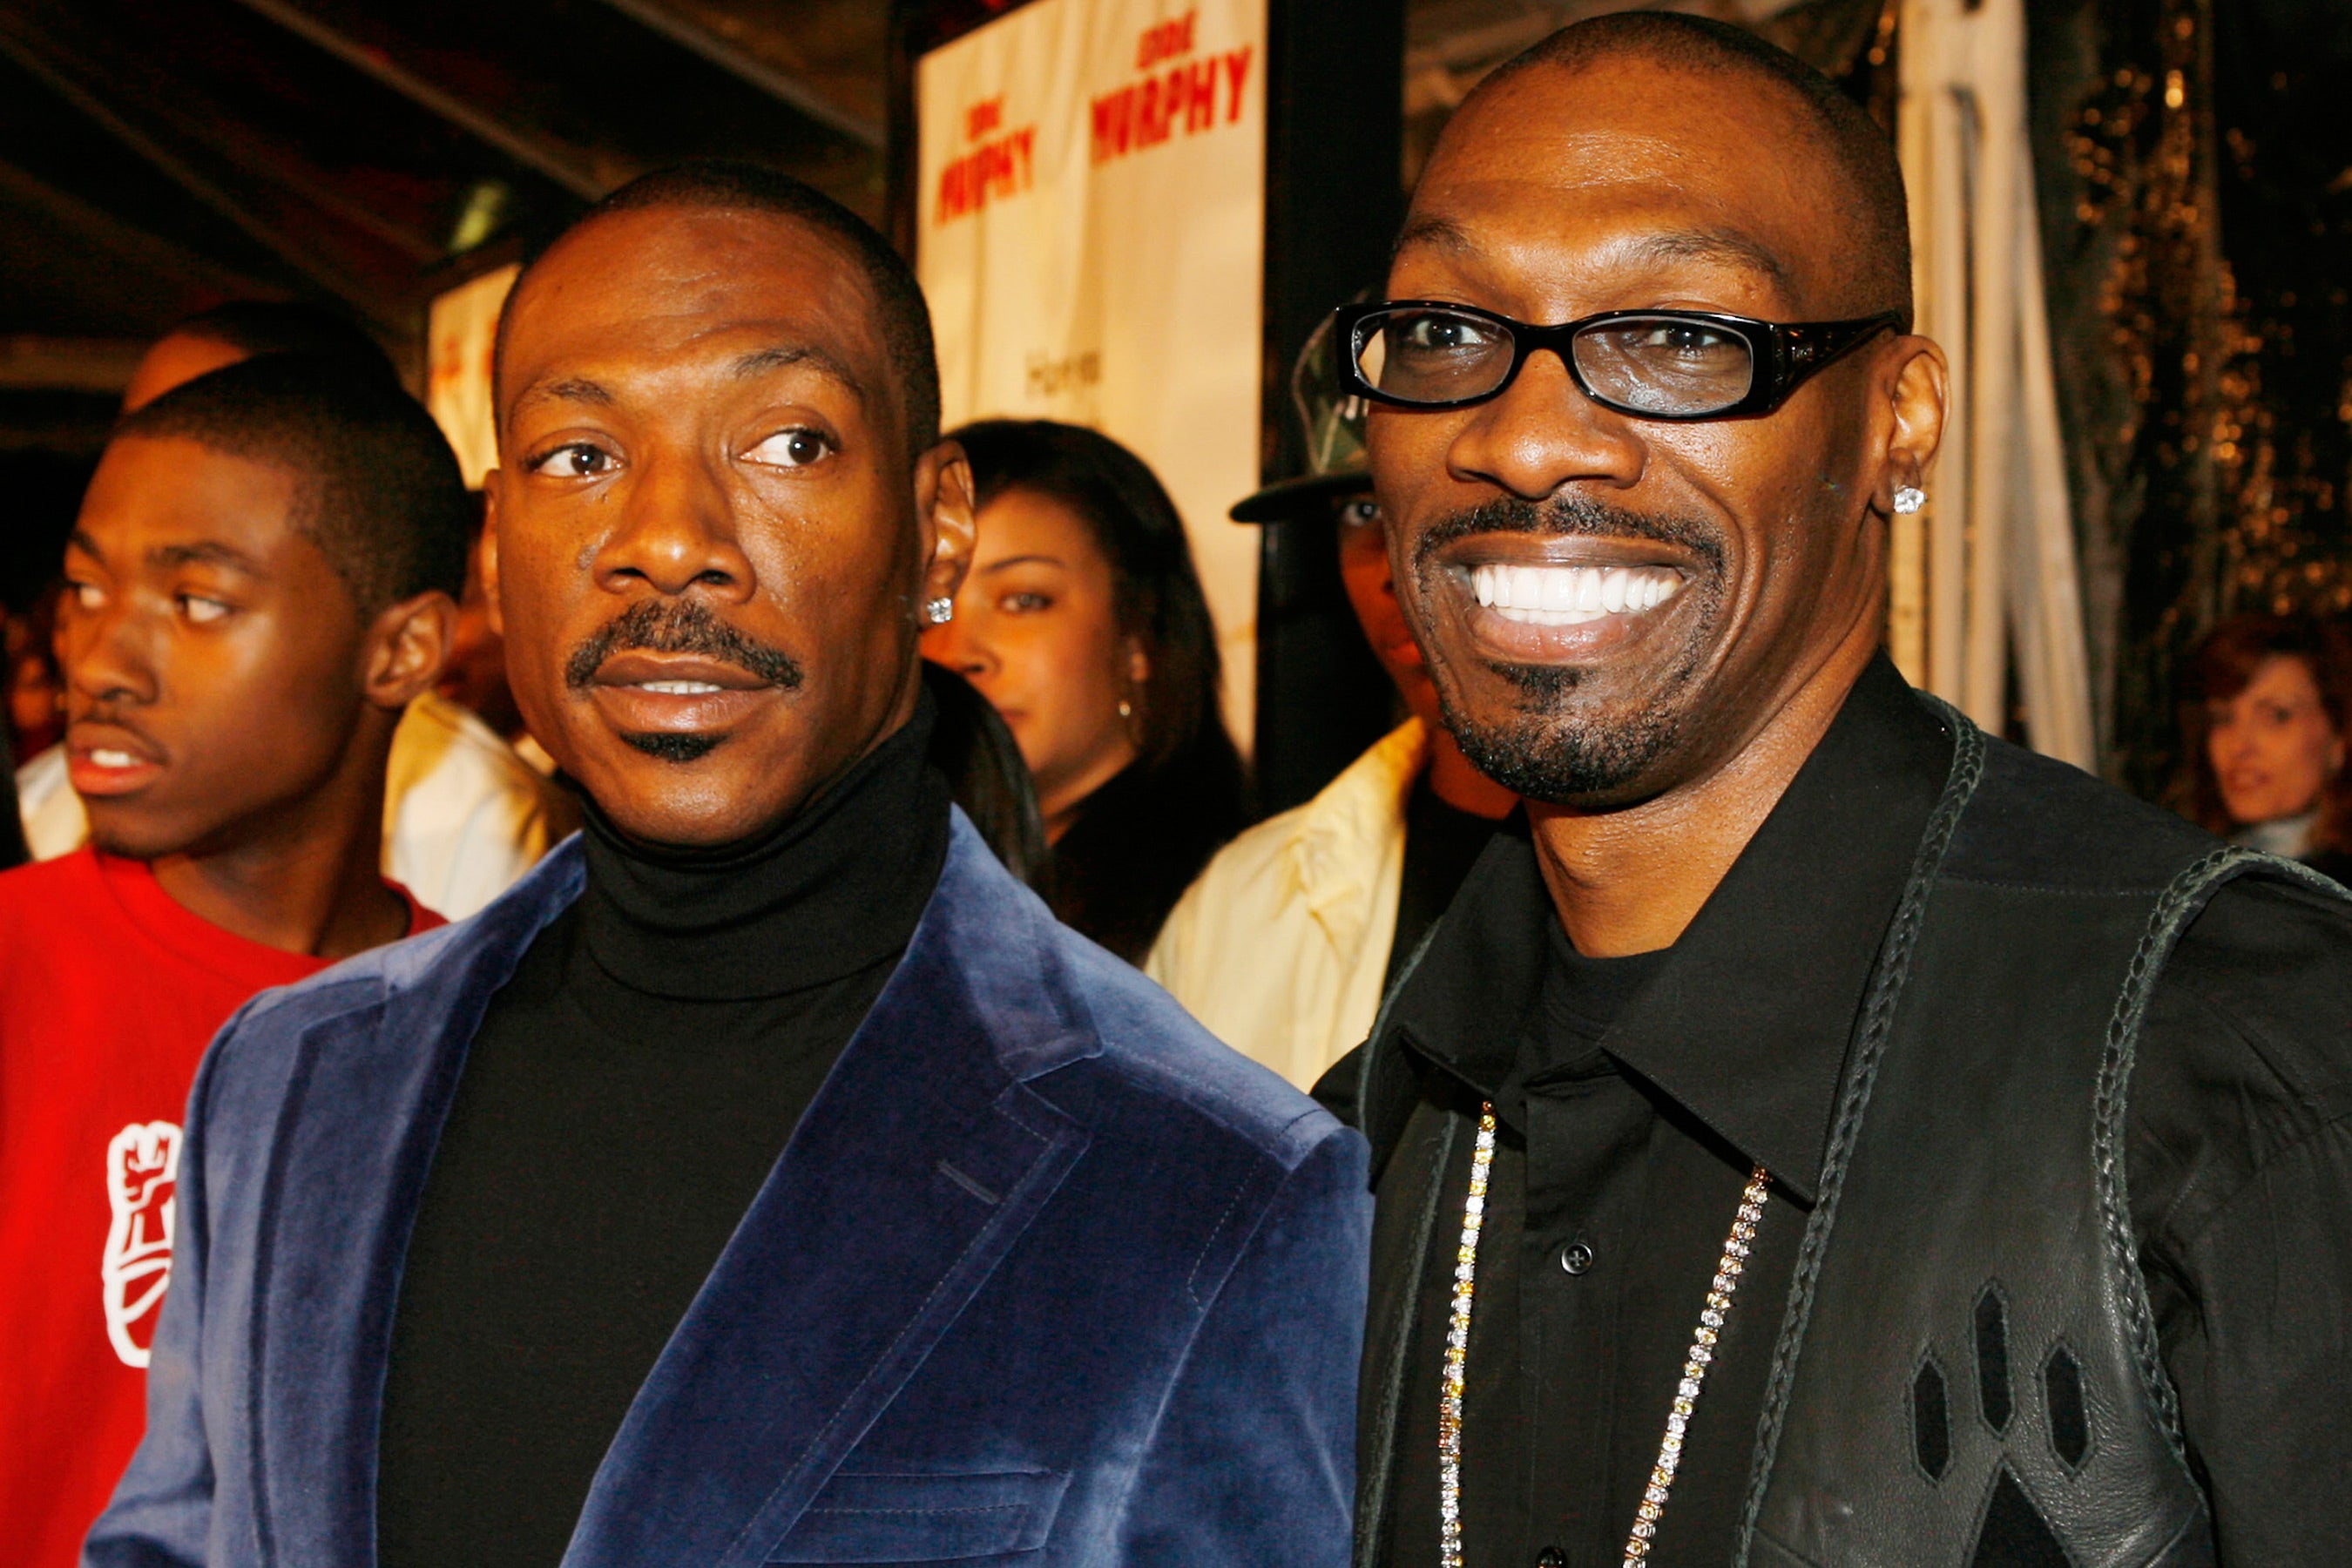 Eddie Murphy And Family Mourn Charlie Murphy: 'Our Hearts Are Heavy'
